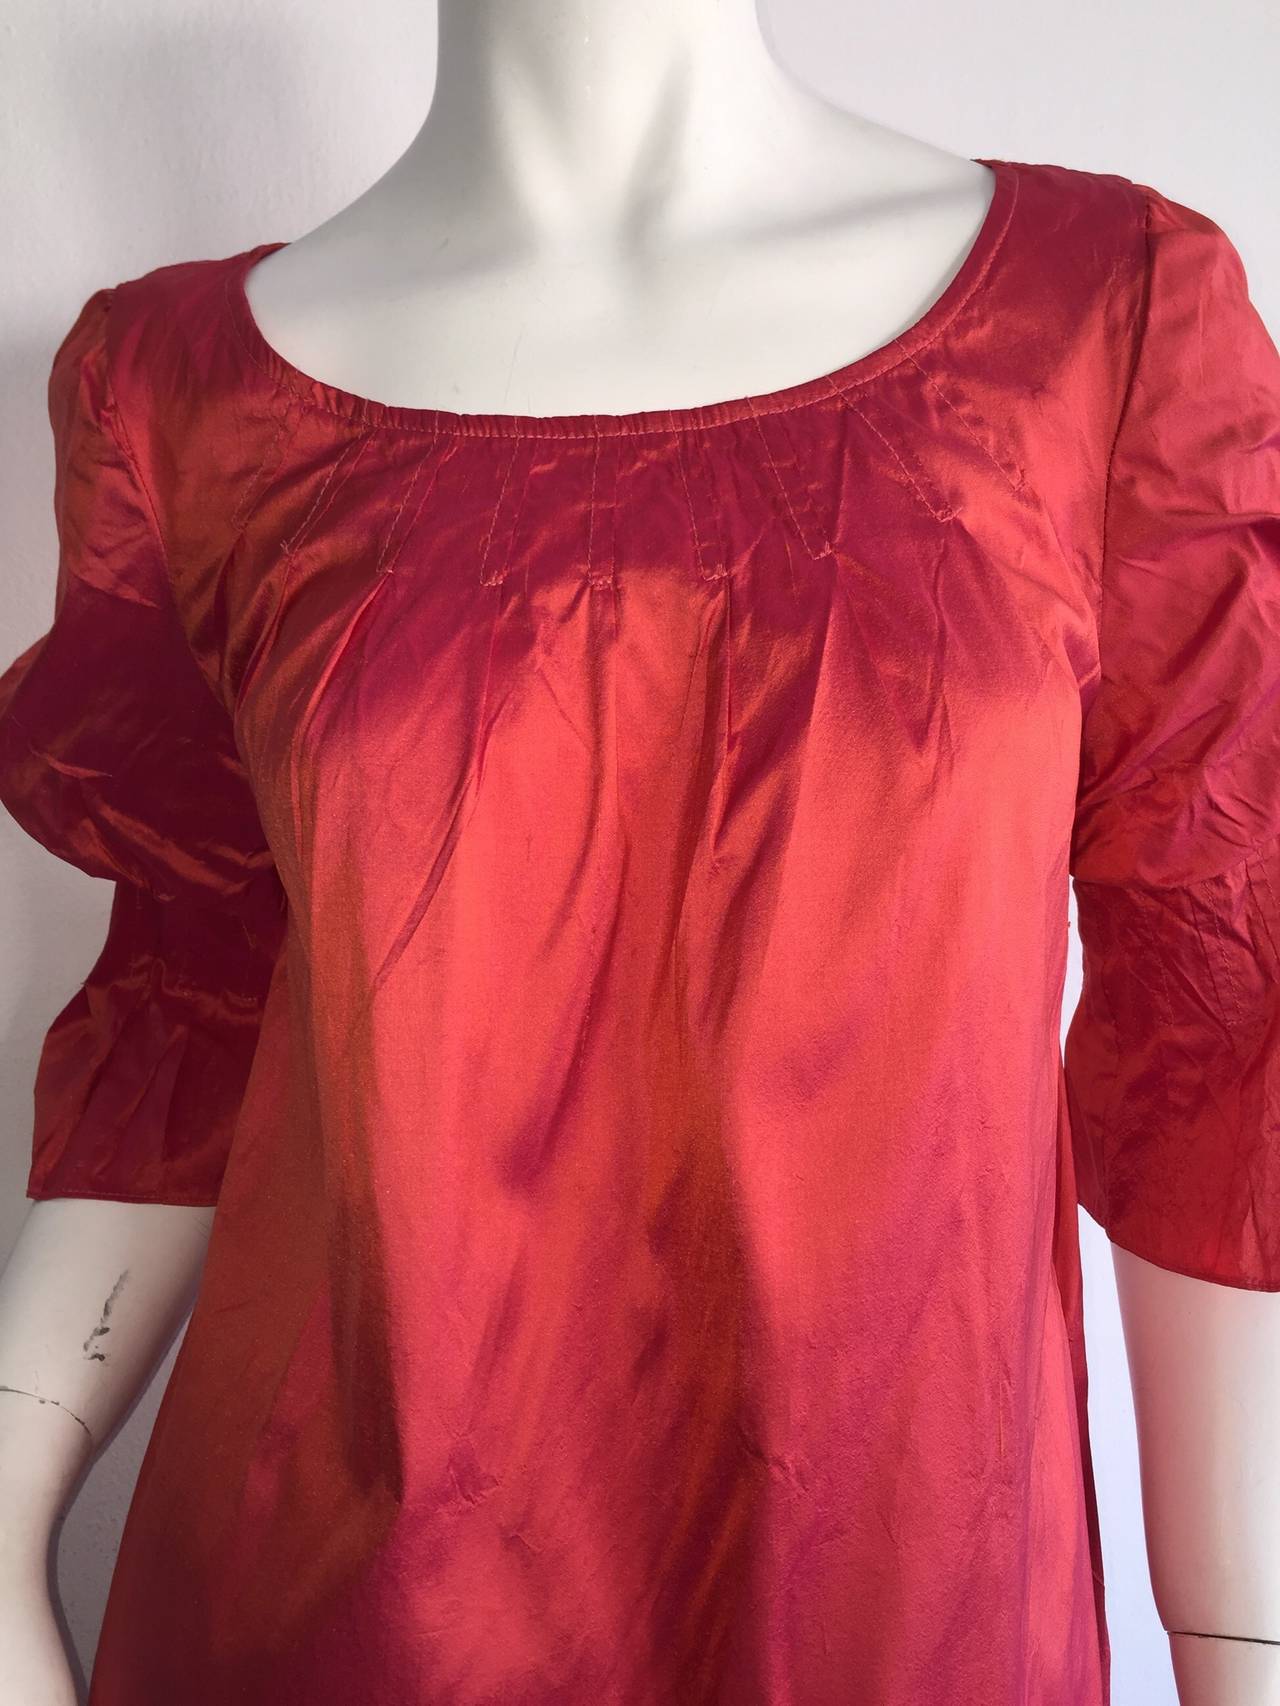 Nina Ricci Pink / Salmon Iridescent Silk Babydoll Bell Sleeve Dress w/ Pockets In Excellent Condition For Sale In San Diego, CA